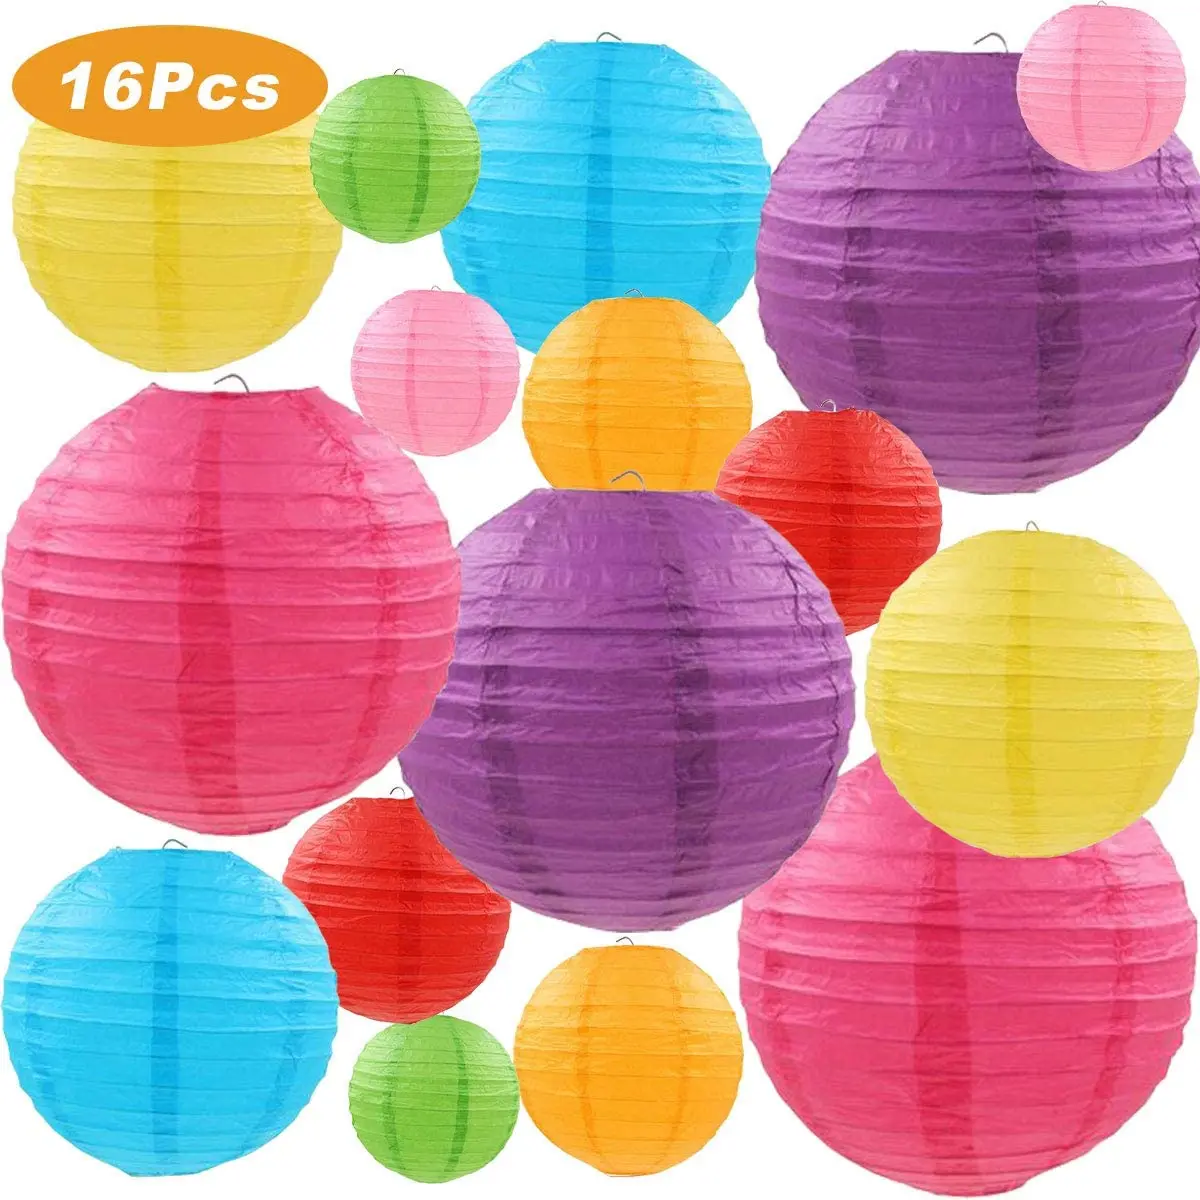 2 Pack Paper Lanterns Japanese and Chinese Style Lamp Shade Plum Flower Dia.16" 